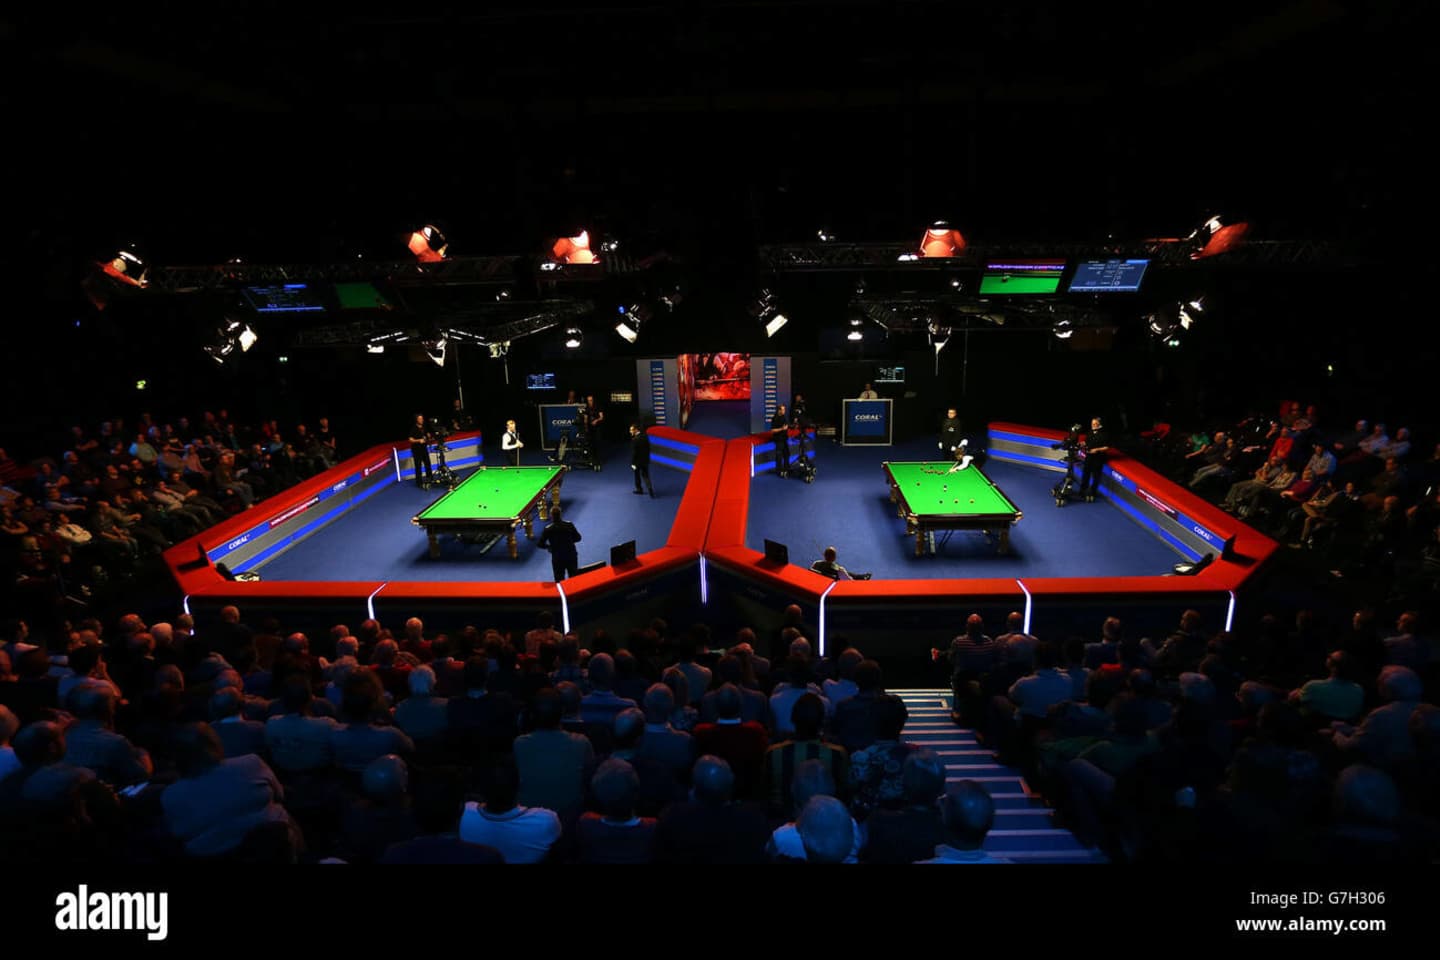 UK Championship Snooker Tickets Buy or Sell UK Championship Snooker